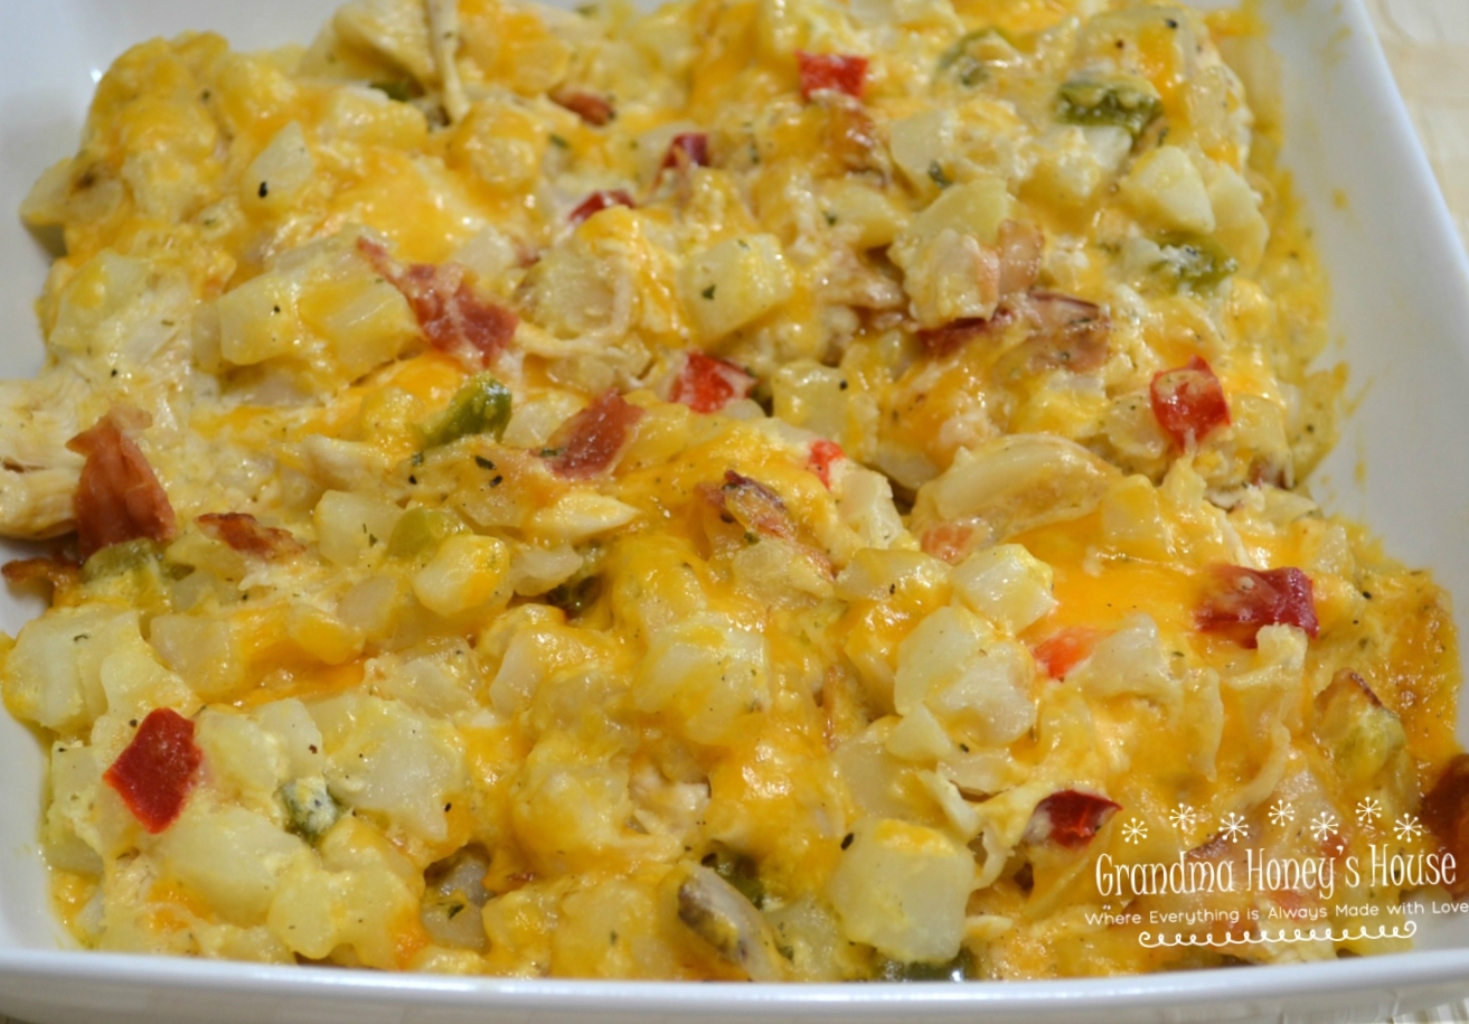 A hearty variation to the hashbrown casserole with chicken, bacon and ranch ingredients.